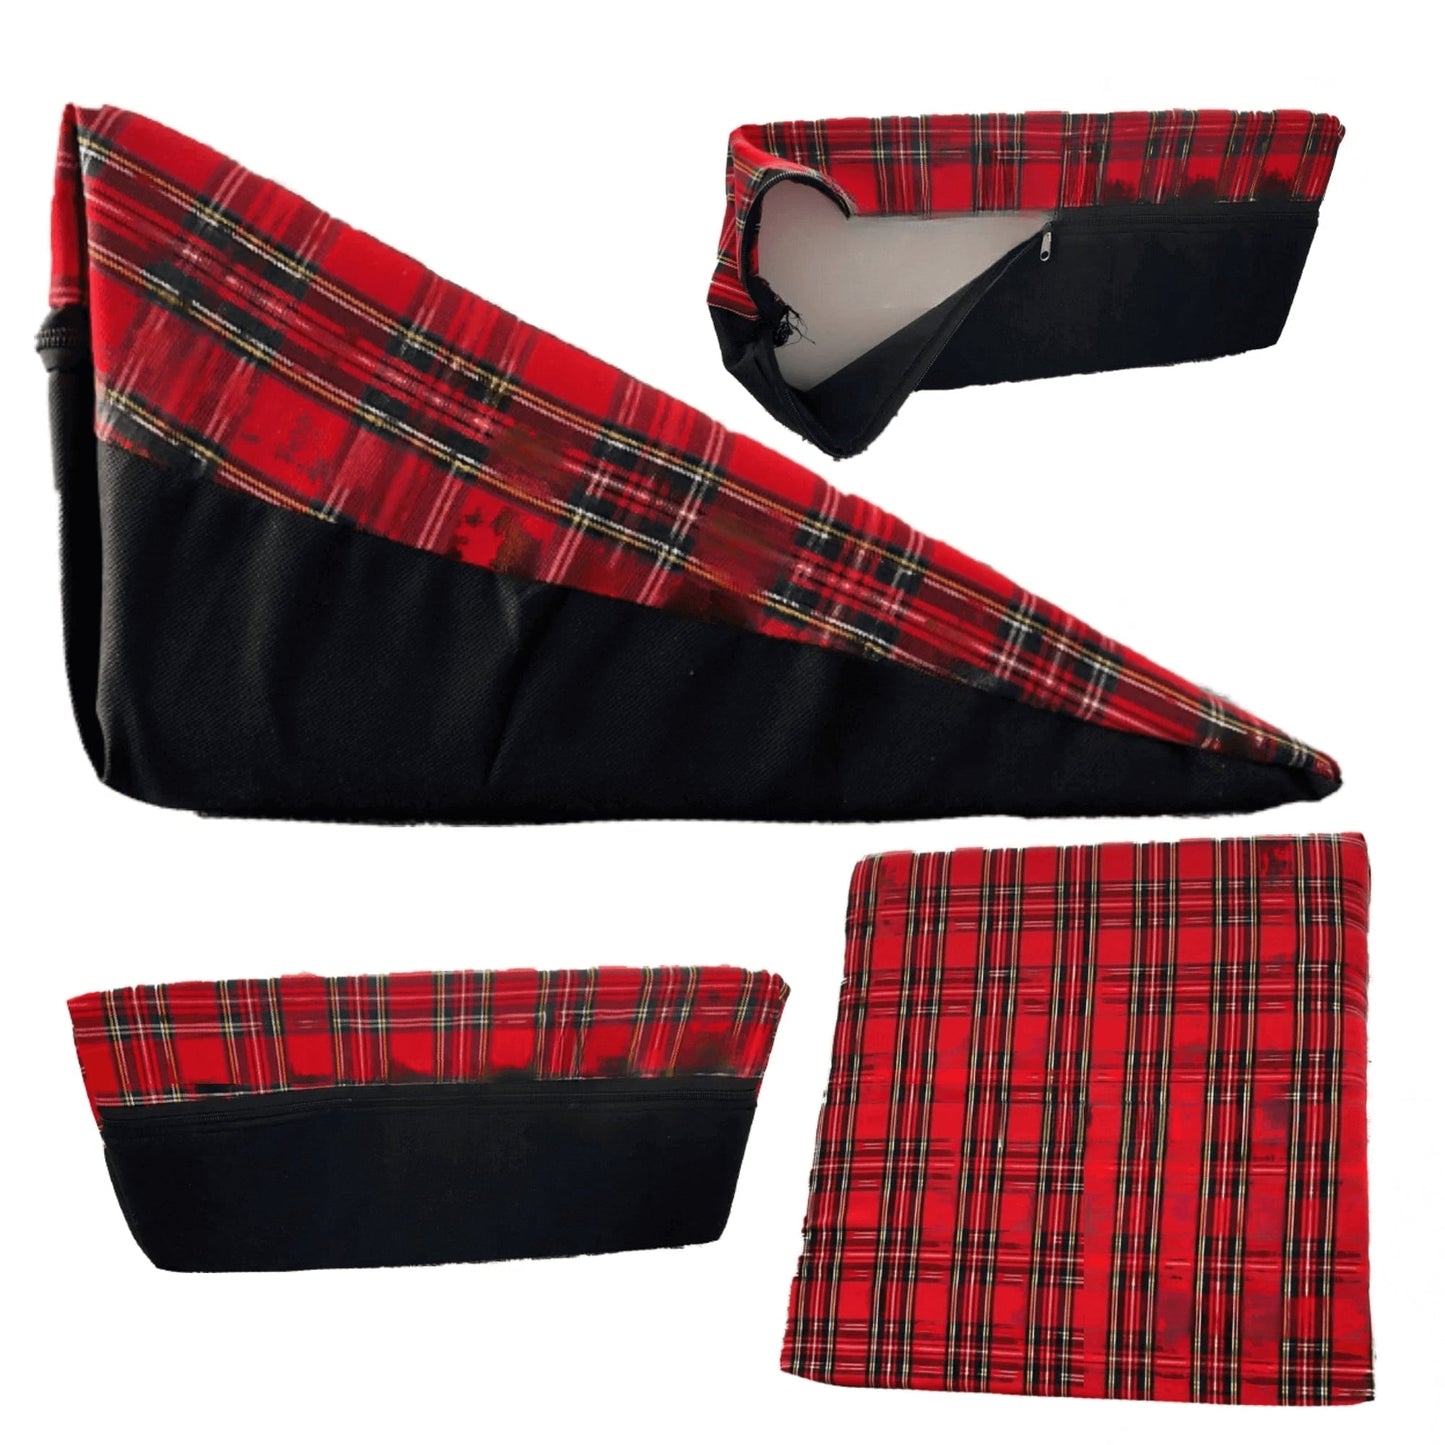 Large Acid Reflux Flex Support Bed Wedge Pillow with Quilted or Tartan Design Cover - TheComfortshop.co.ukPillows0721718971627thecomfortshopTheComfortshop.co.ukBACK Wedge TARTAN RED TOPTartan Red TopLarge Acid Reflux Flex Support Bed Wedge Pillow with Quilted or Tartan Design Cover - TheComfortshop.co.uk